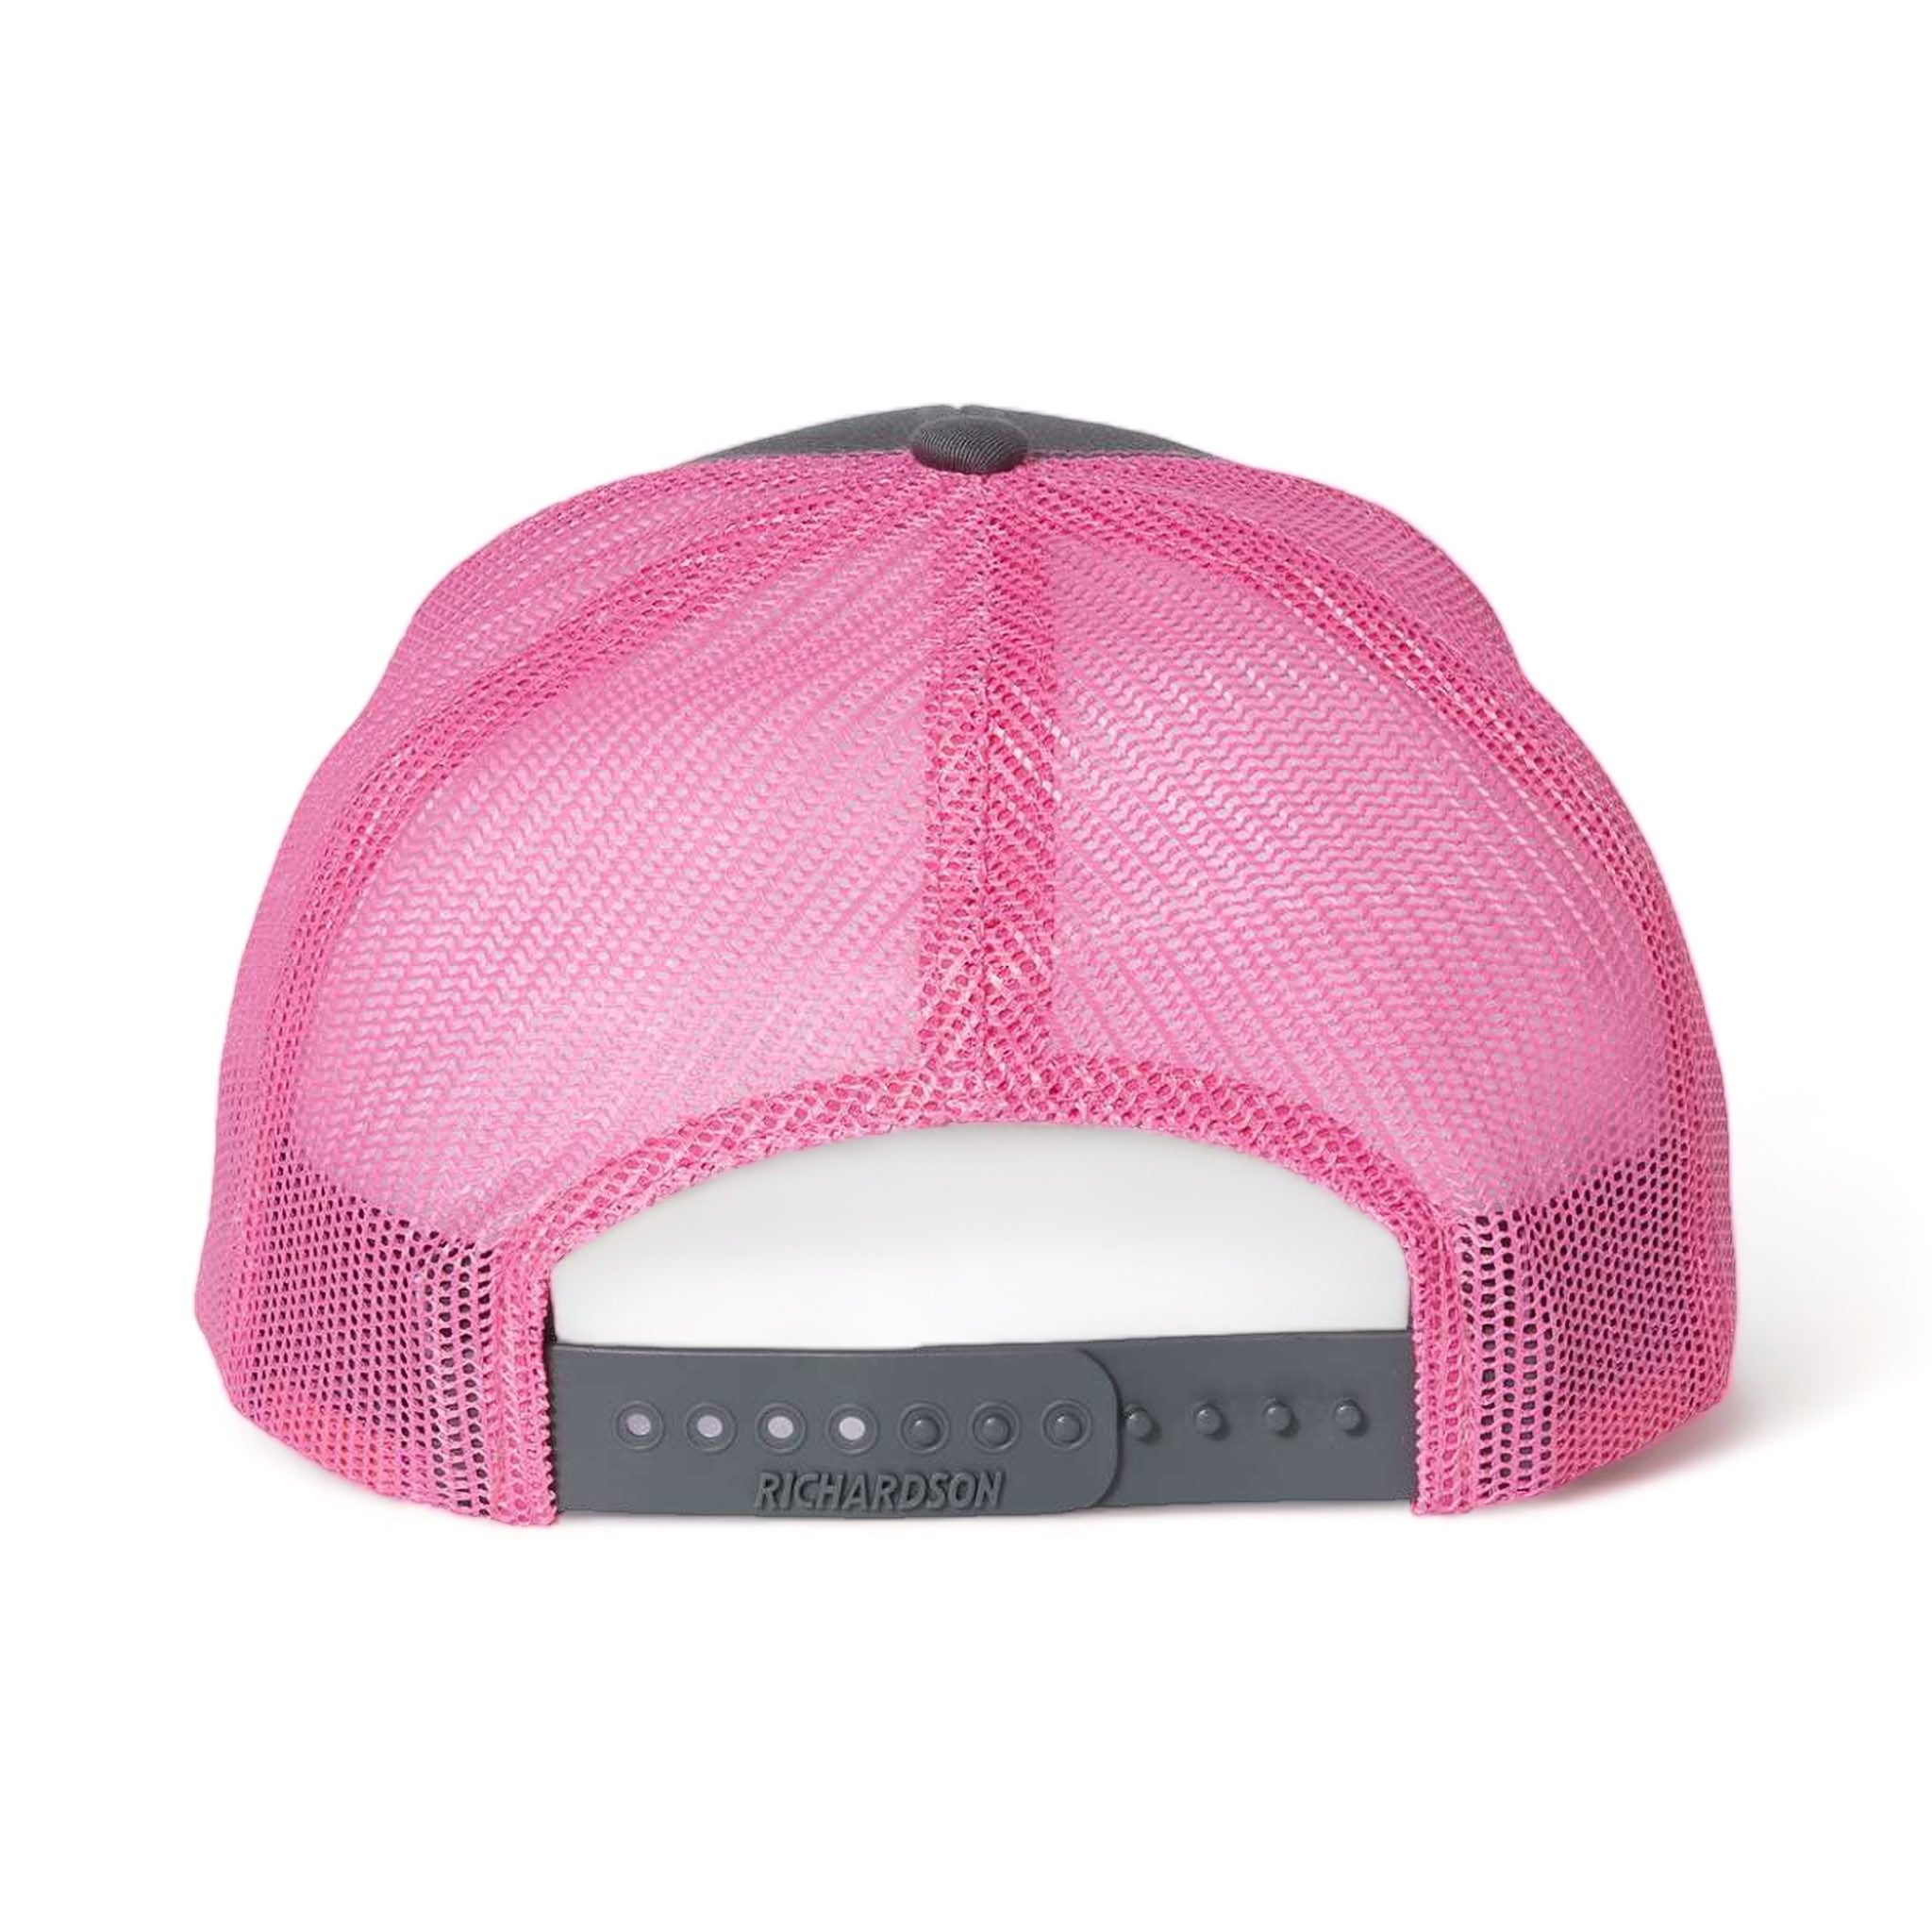 Back view of Richardson 112 custom hat in charcoal and neon pink